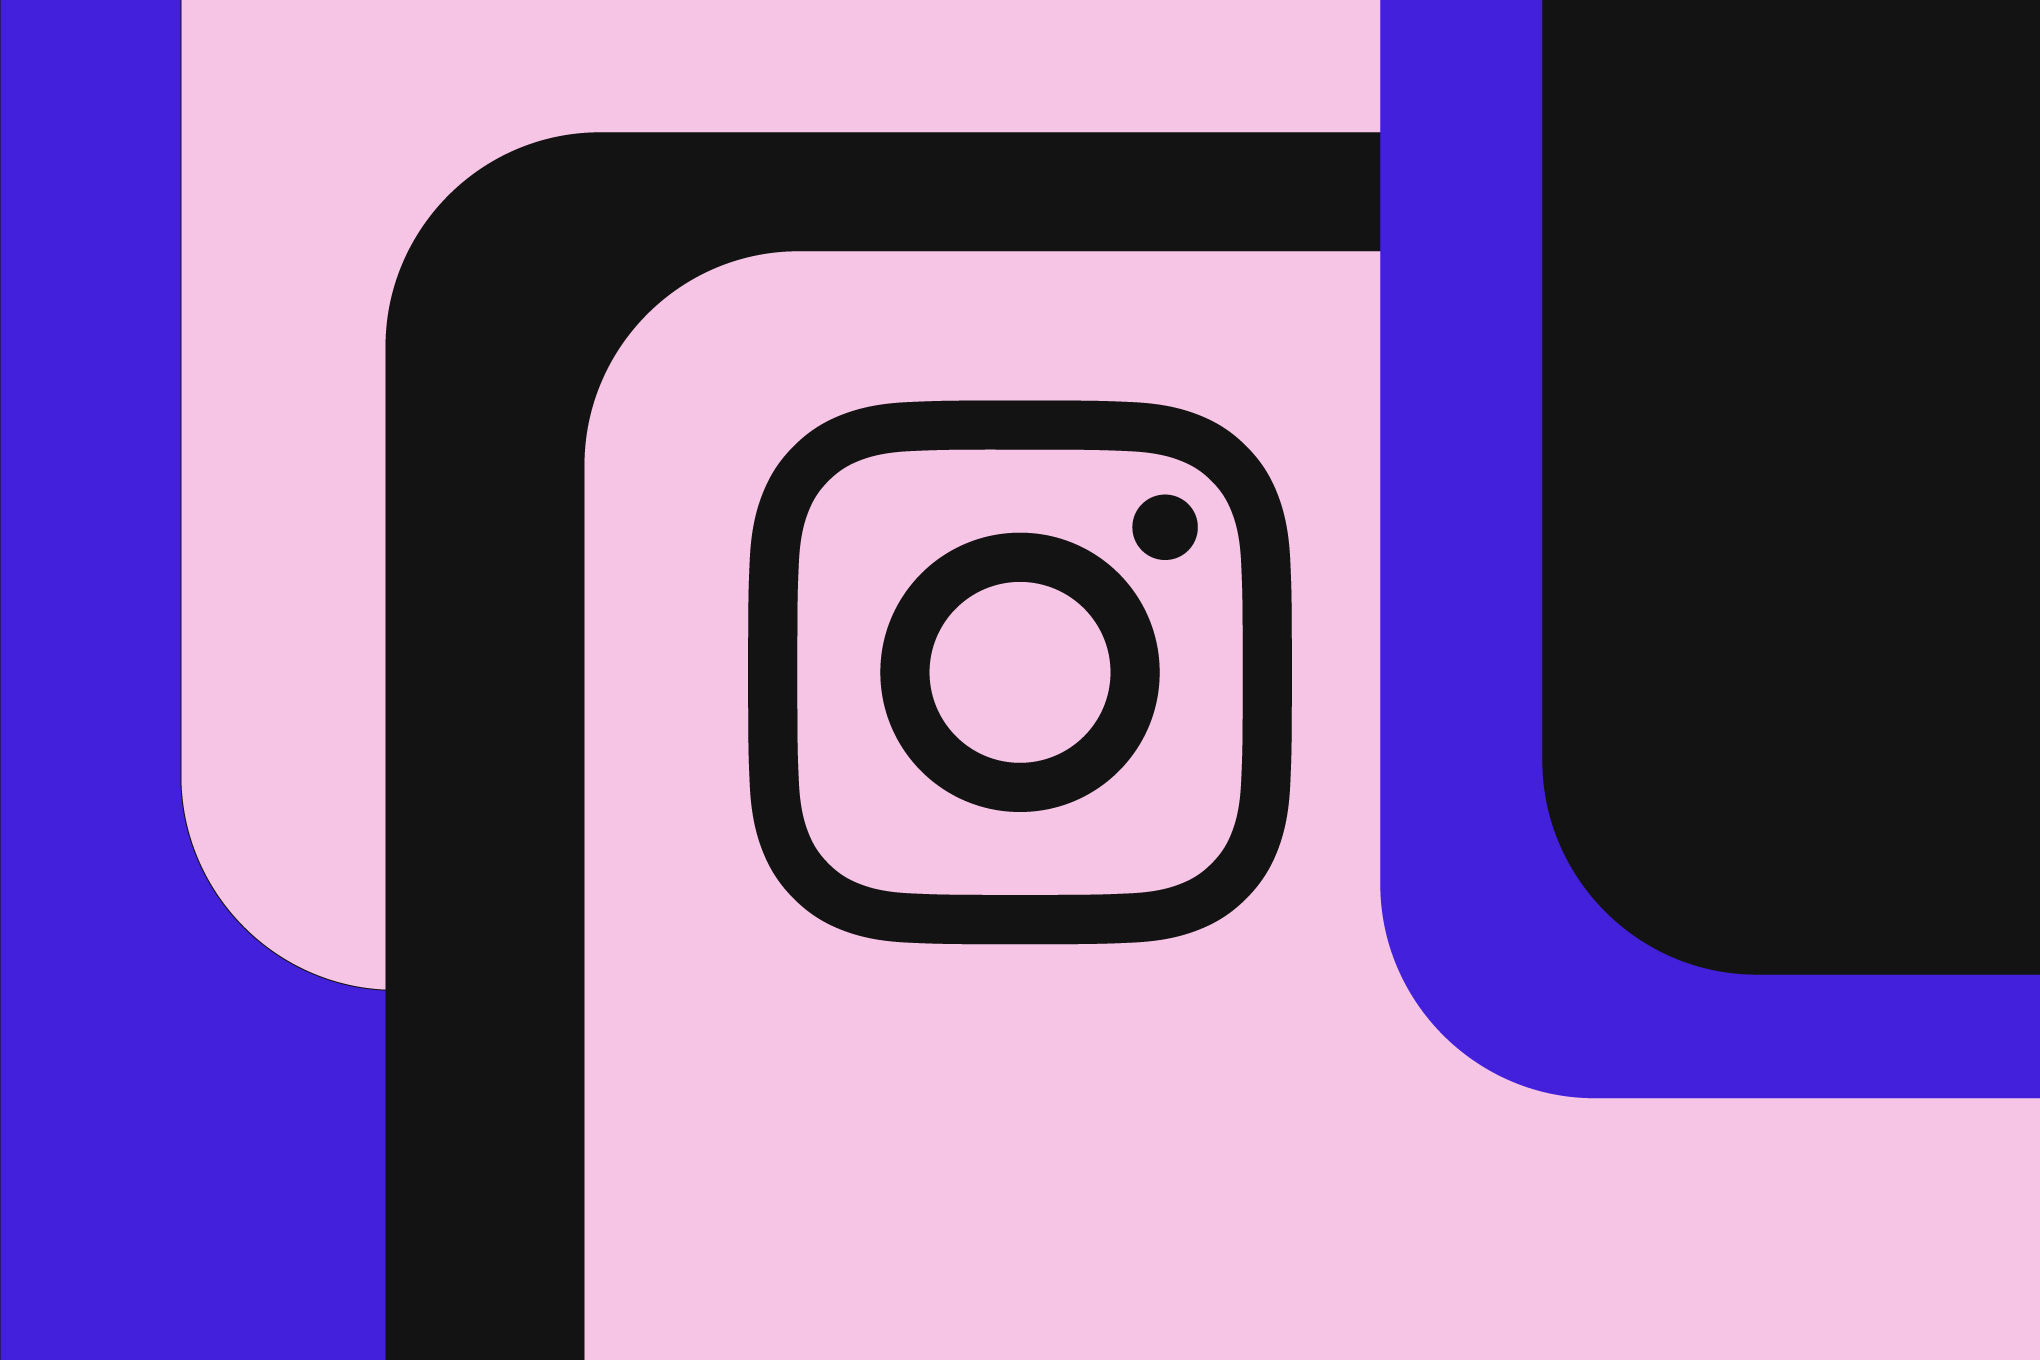 The Instagram camera icon on a pink, blue and black background 